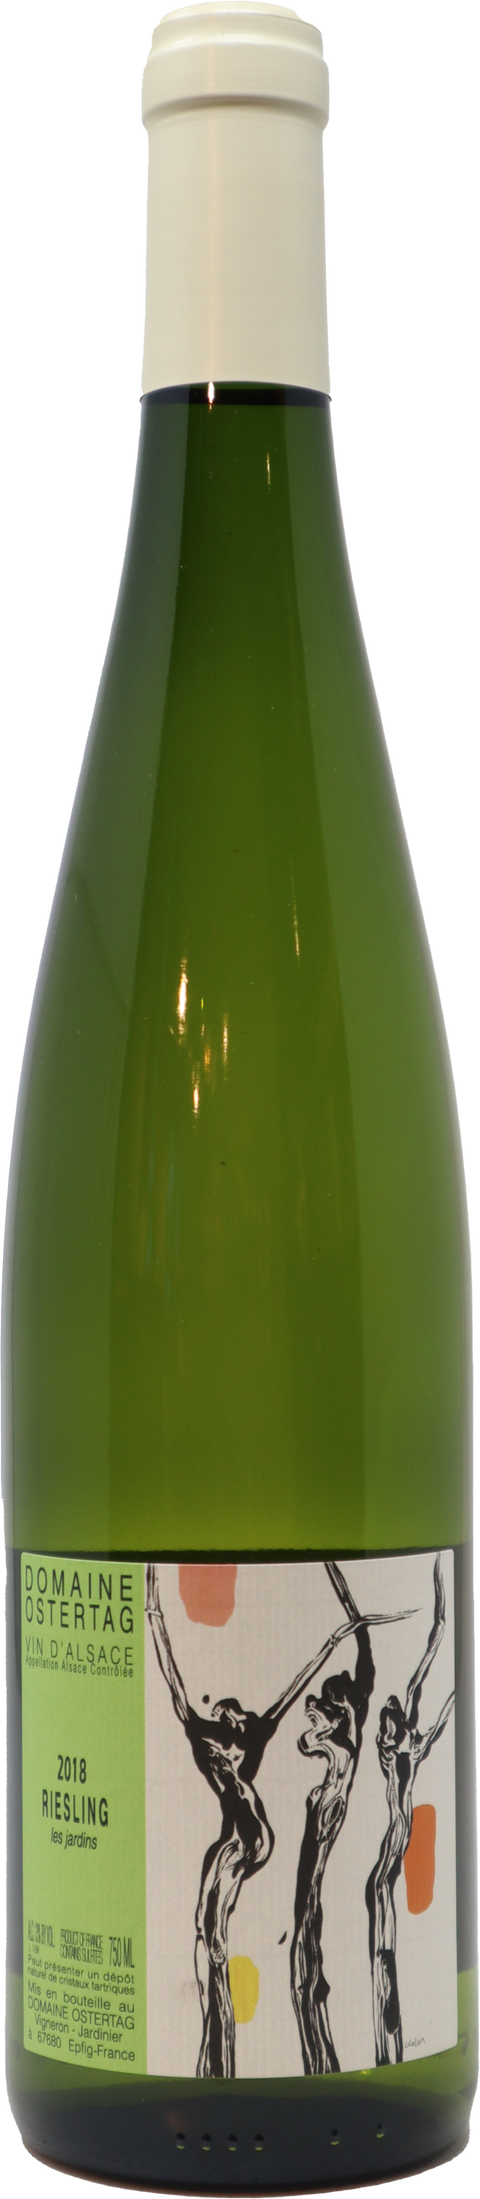 2021 Domaine Ostertag Riesling "Les Jardins", Alsace, France